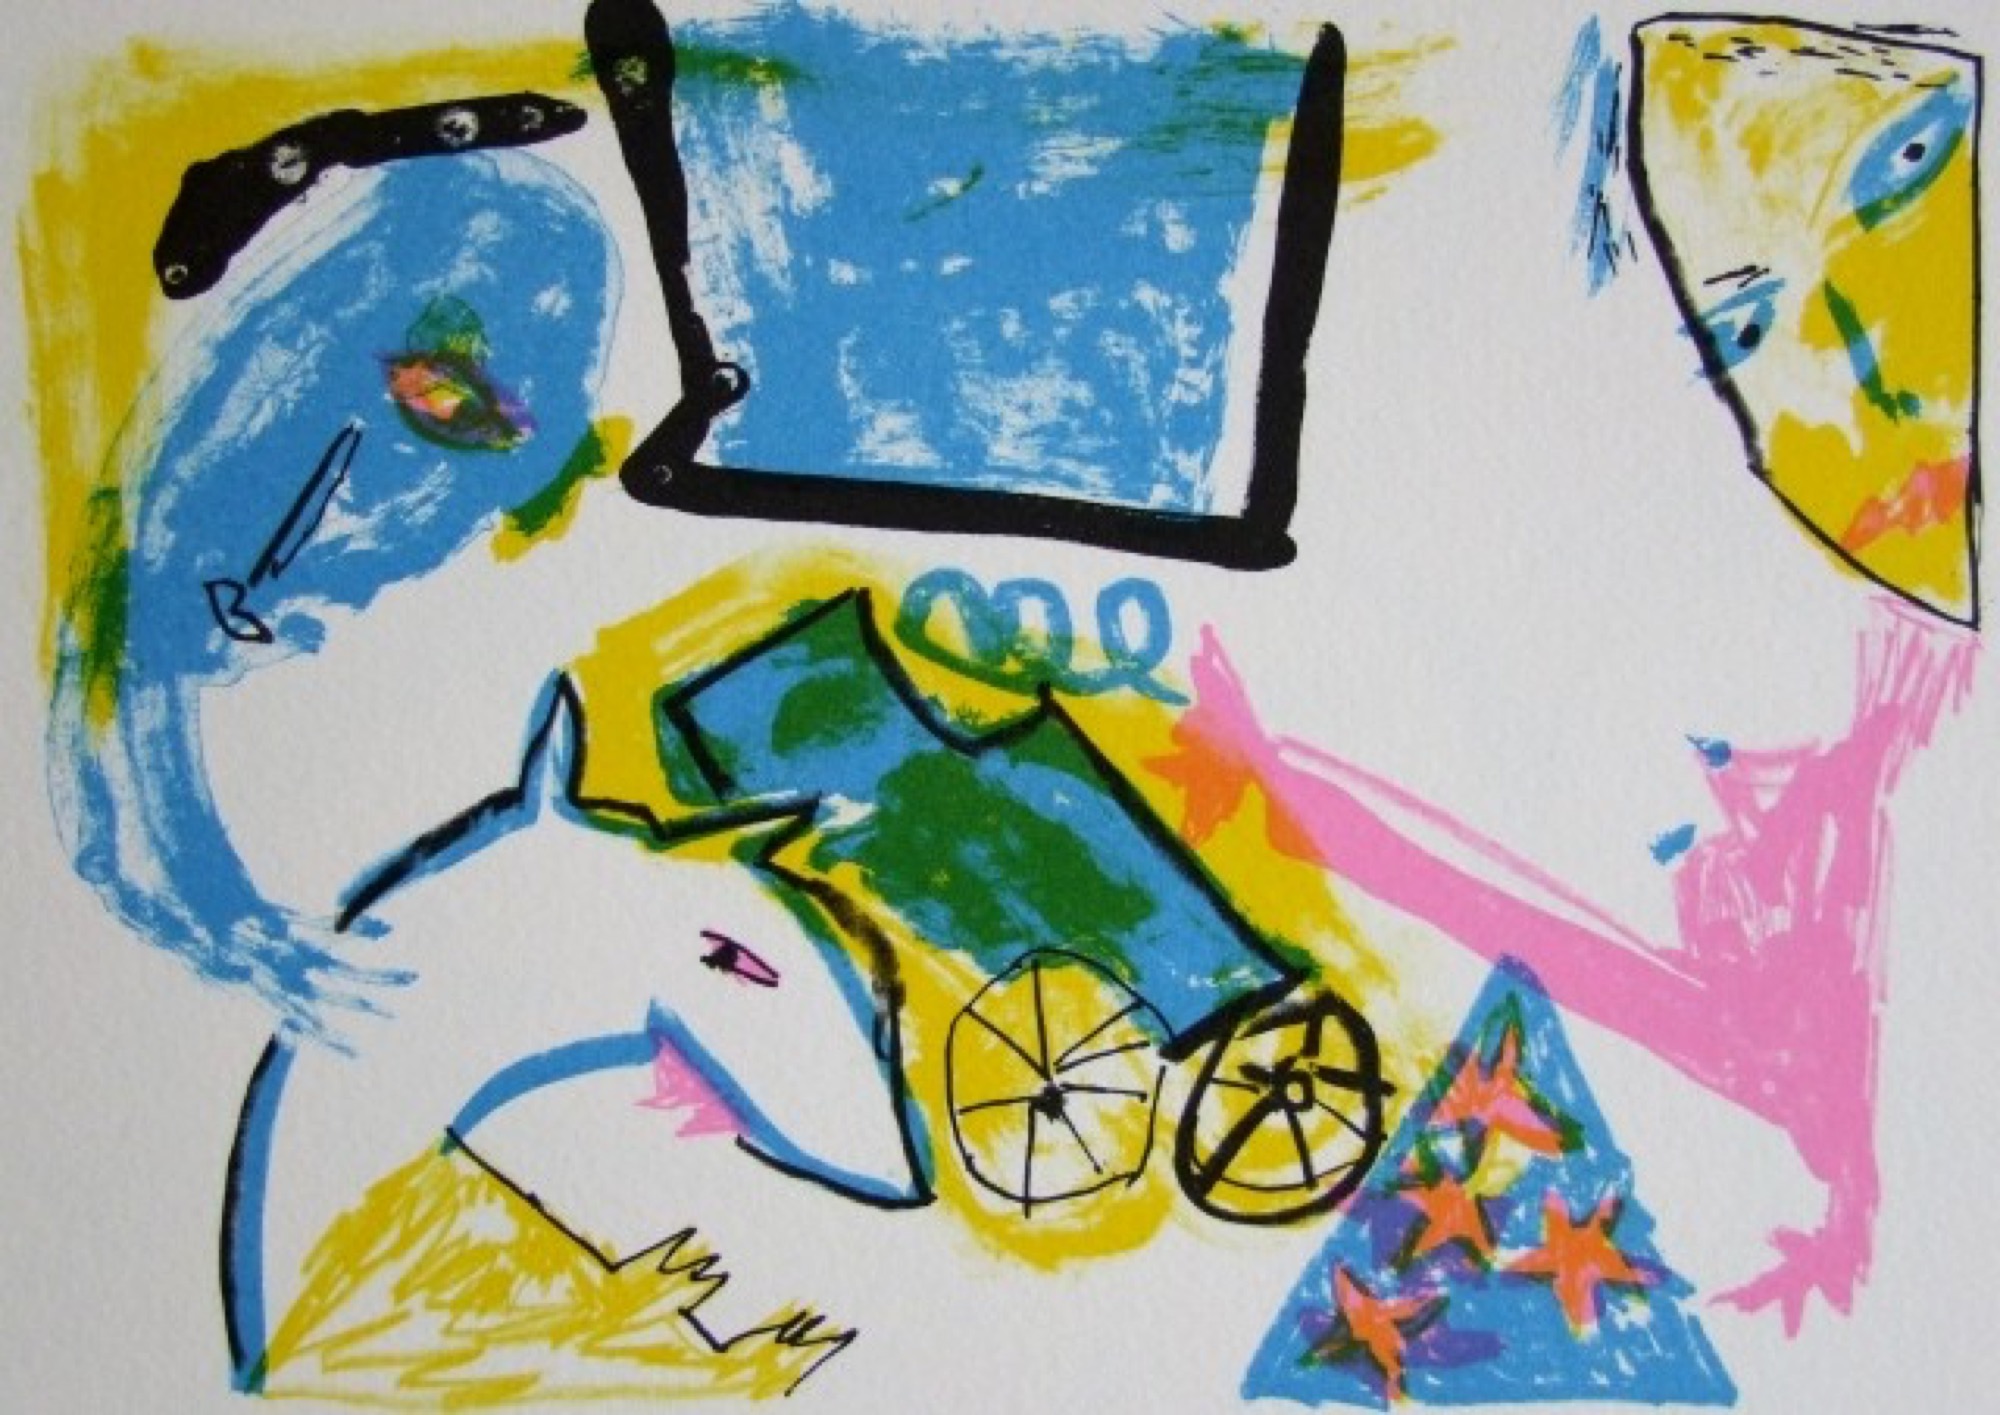 Davida Allen, <em>Dog is not a dog</em>, 1991, lithograph, printed in yellow, blue, pink and black inks, from four stones/plates, edition 40, 16.0 cm x 22.0 cm. Australian Galleries.